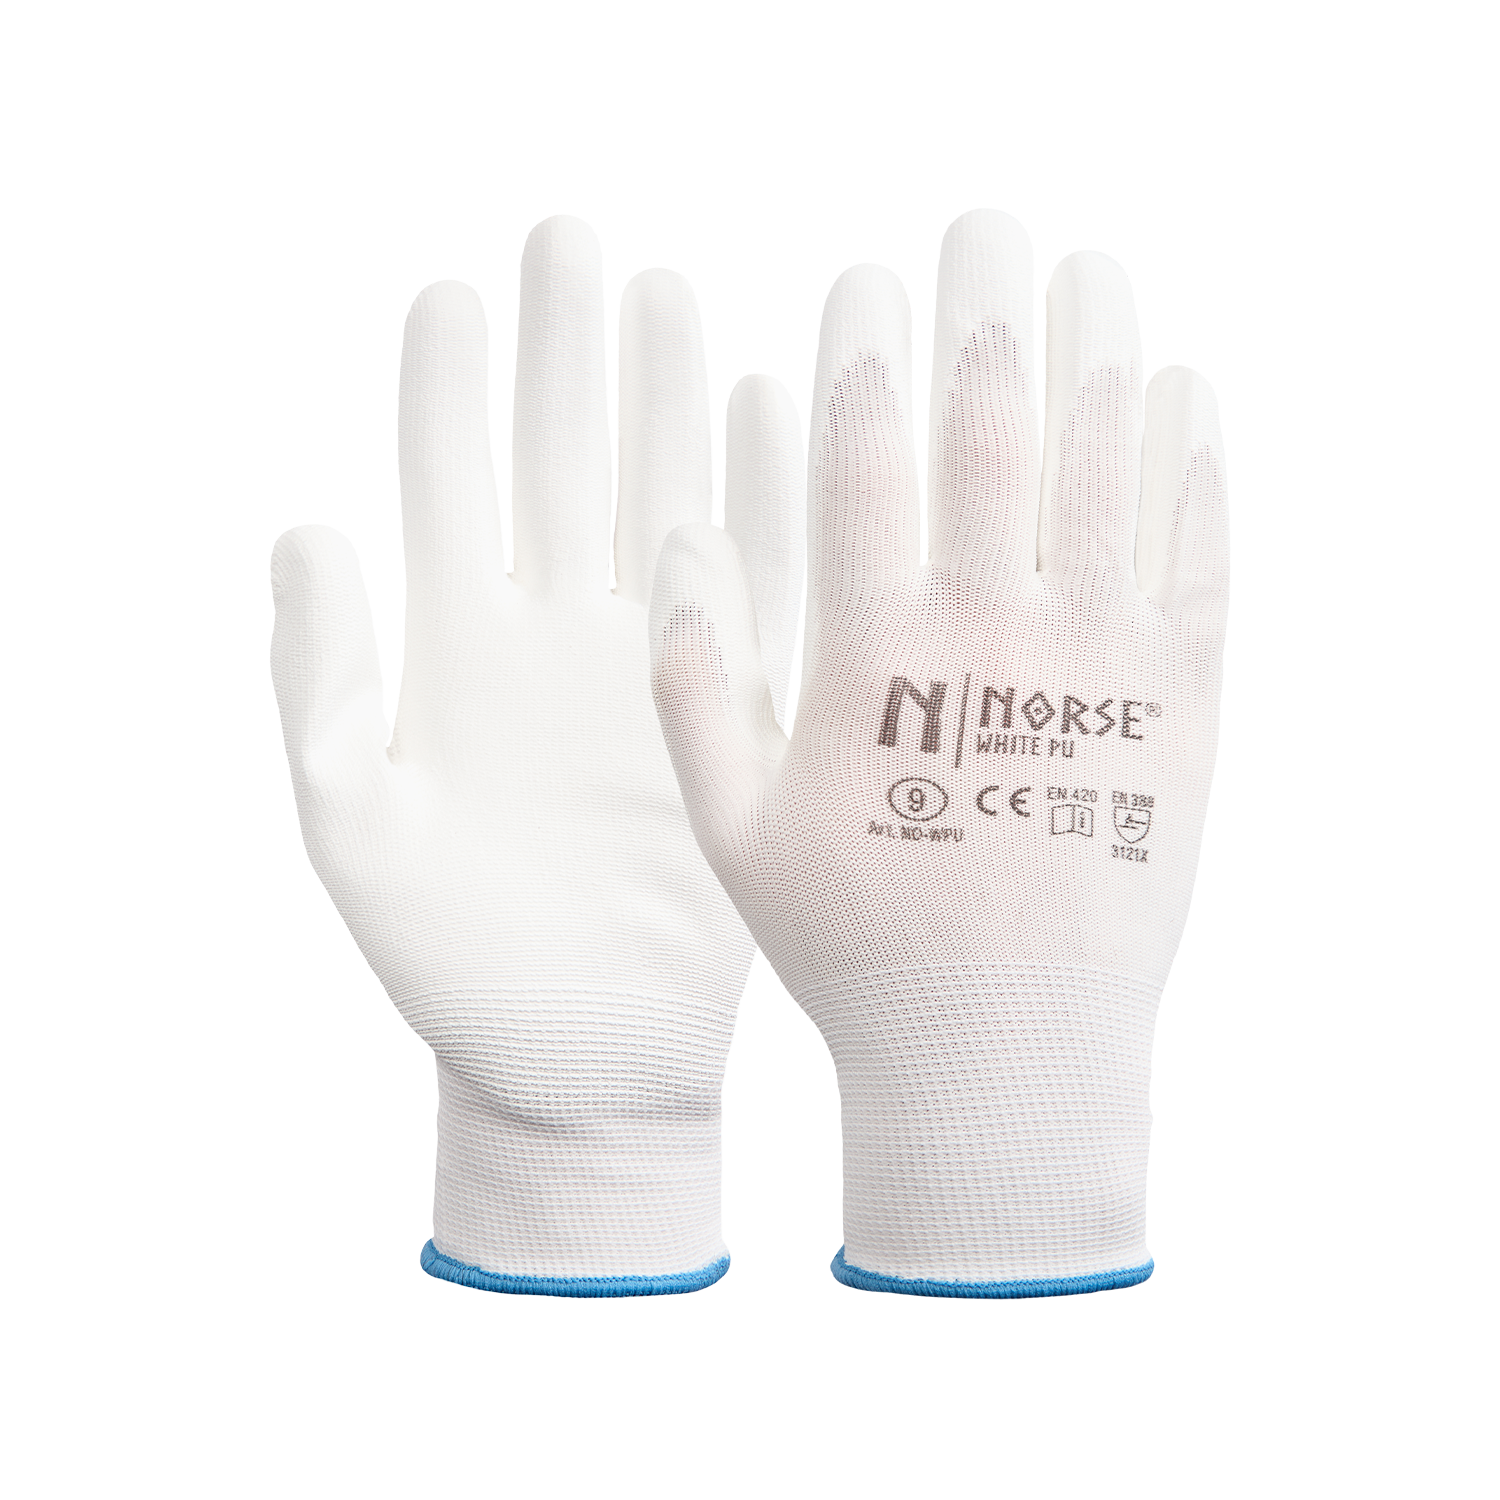 NORSE PU White assembly gloves size 10